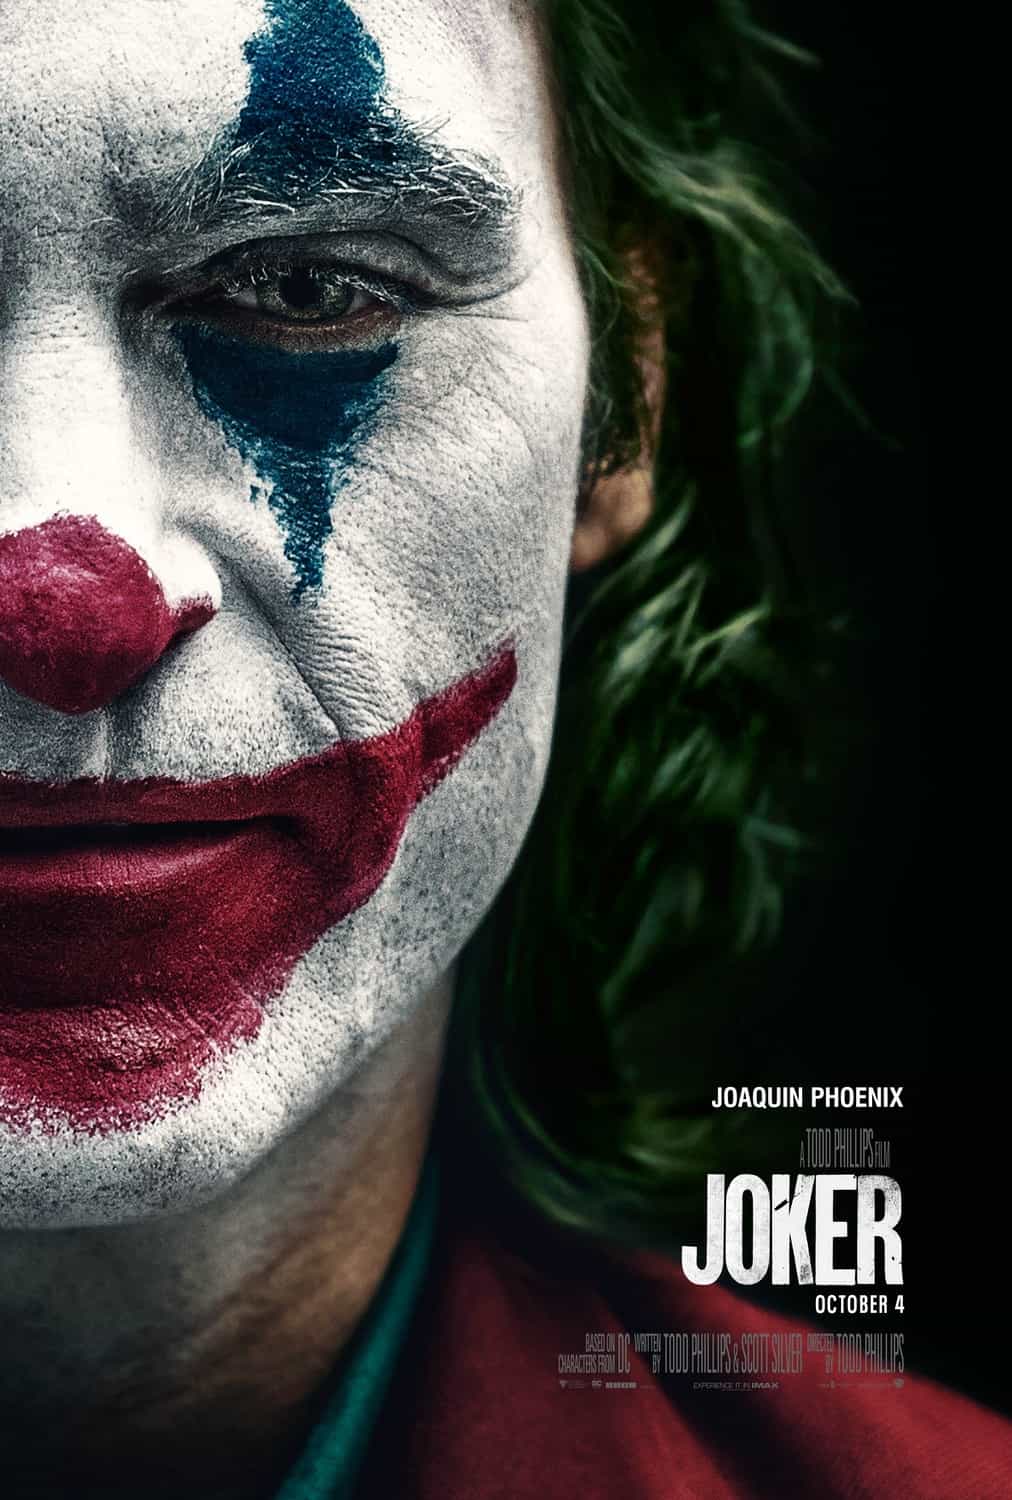 US Box Office Analysis 4th - 6th October 2019:  Joker hits the top with record breaking October launch in the US